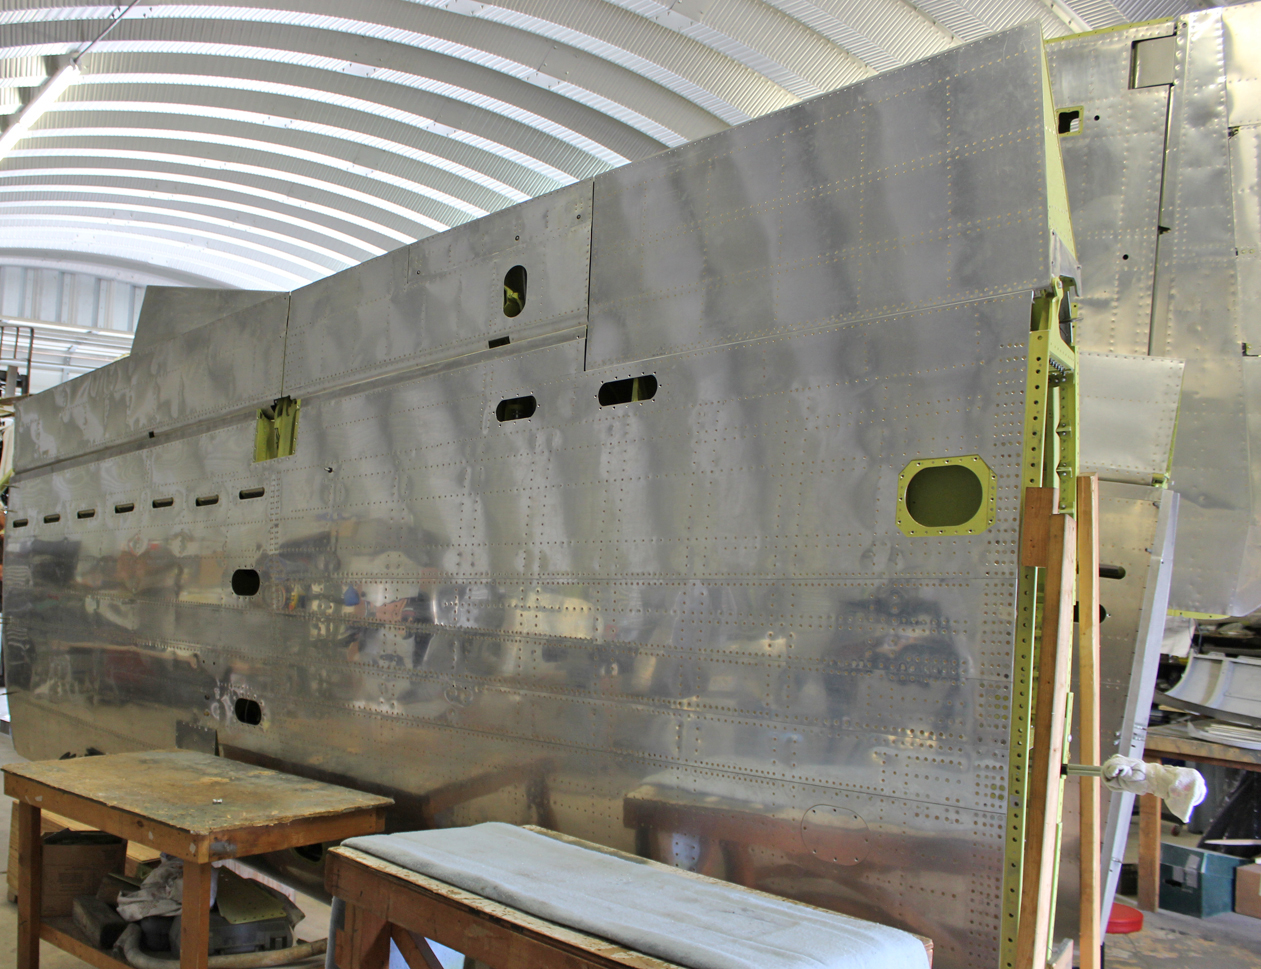 The completed outer wing panel. (photo via Tom Reilly)